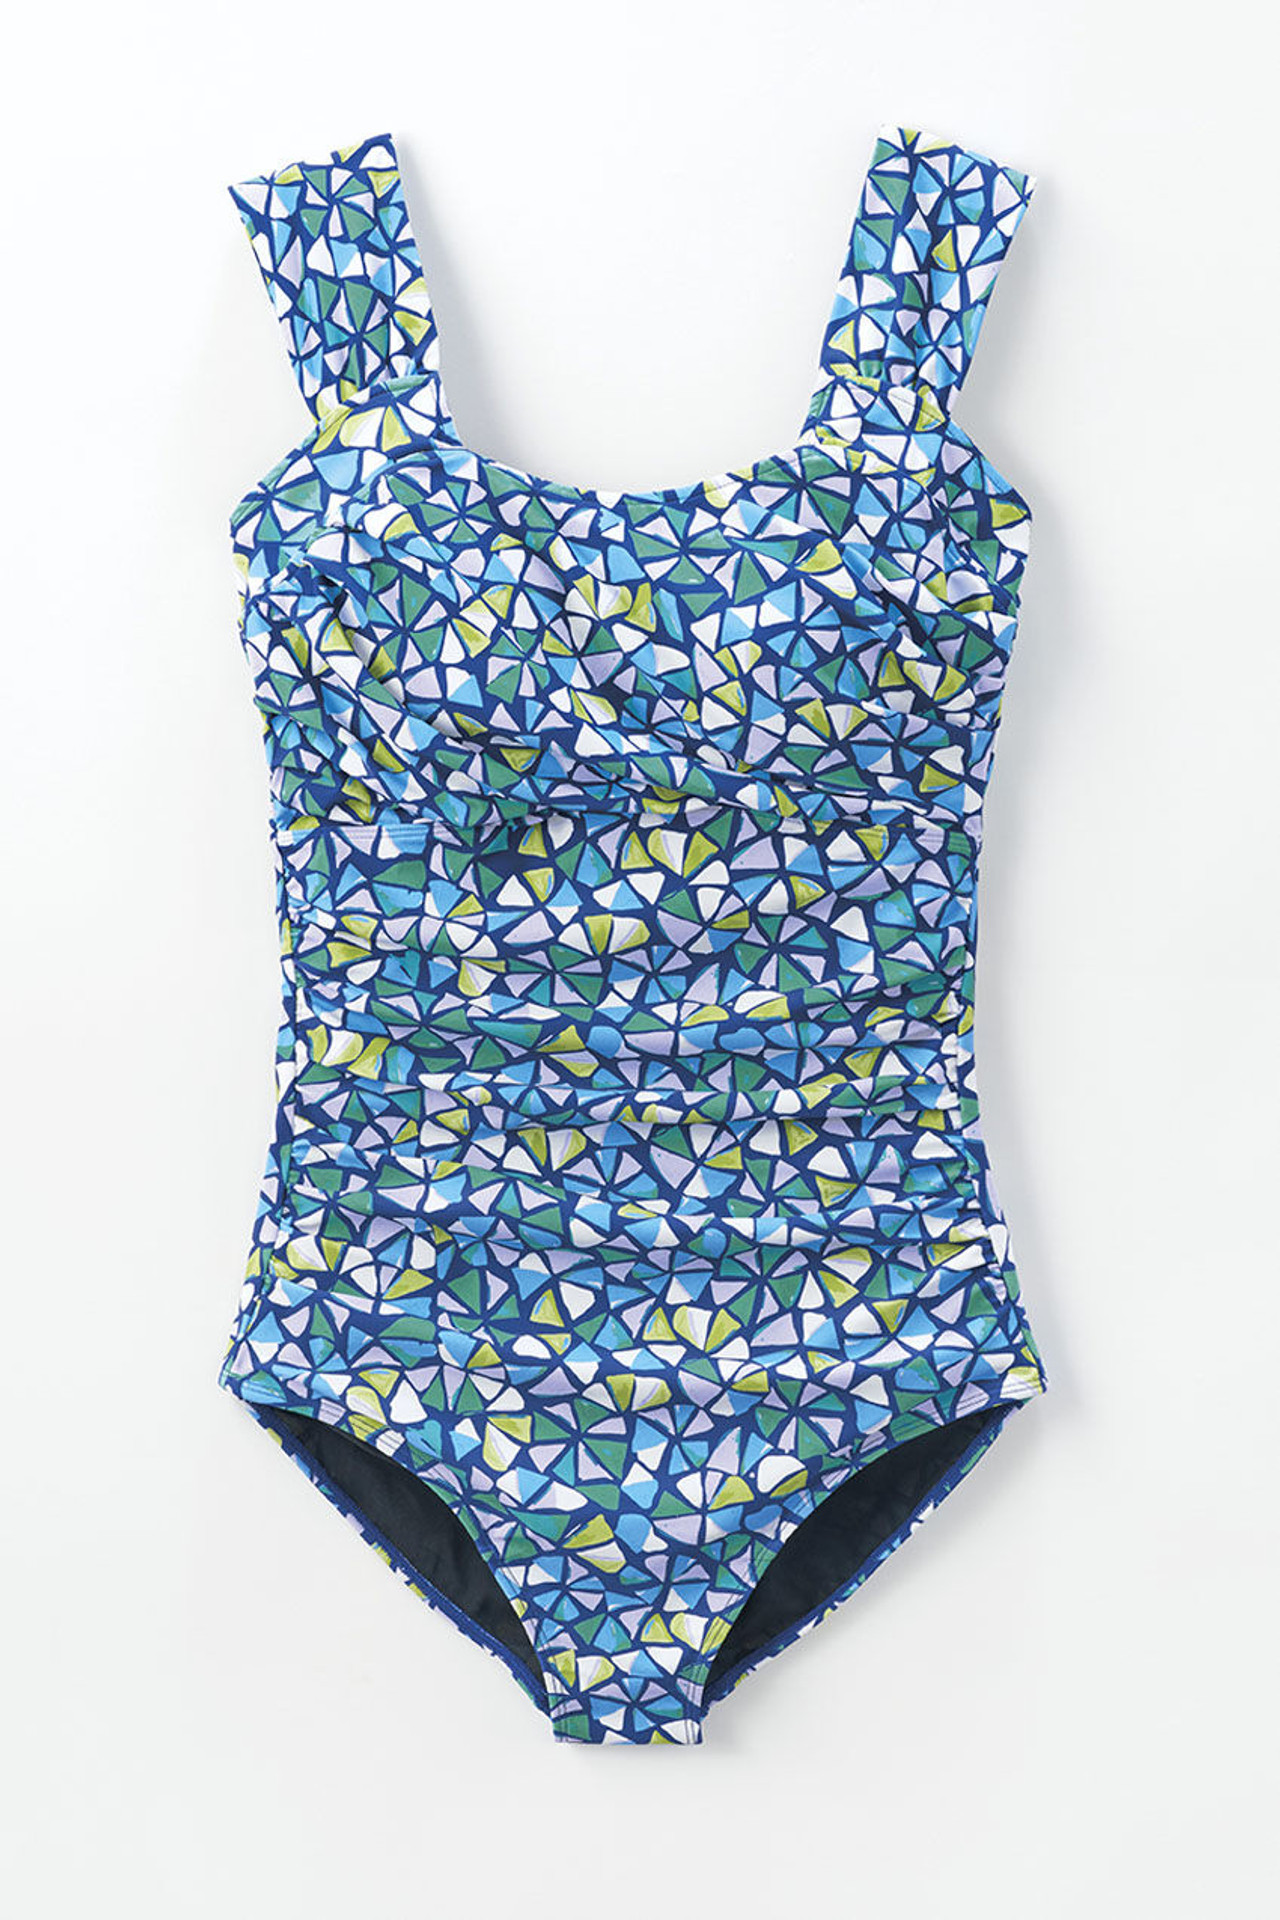 https://cdn11.bigcommerce.com/s-lulfv0vz2b/images/stencil/1280w/products/10819/71949/shapeme-mosaic-ruched-bathing-suit__navy-multi_0__90976__66619.1705070151.jpg?c=1